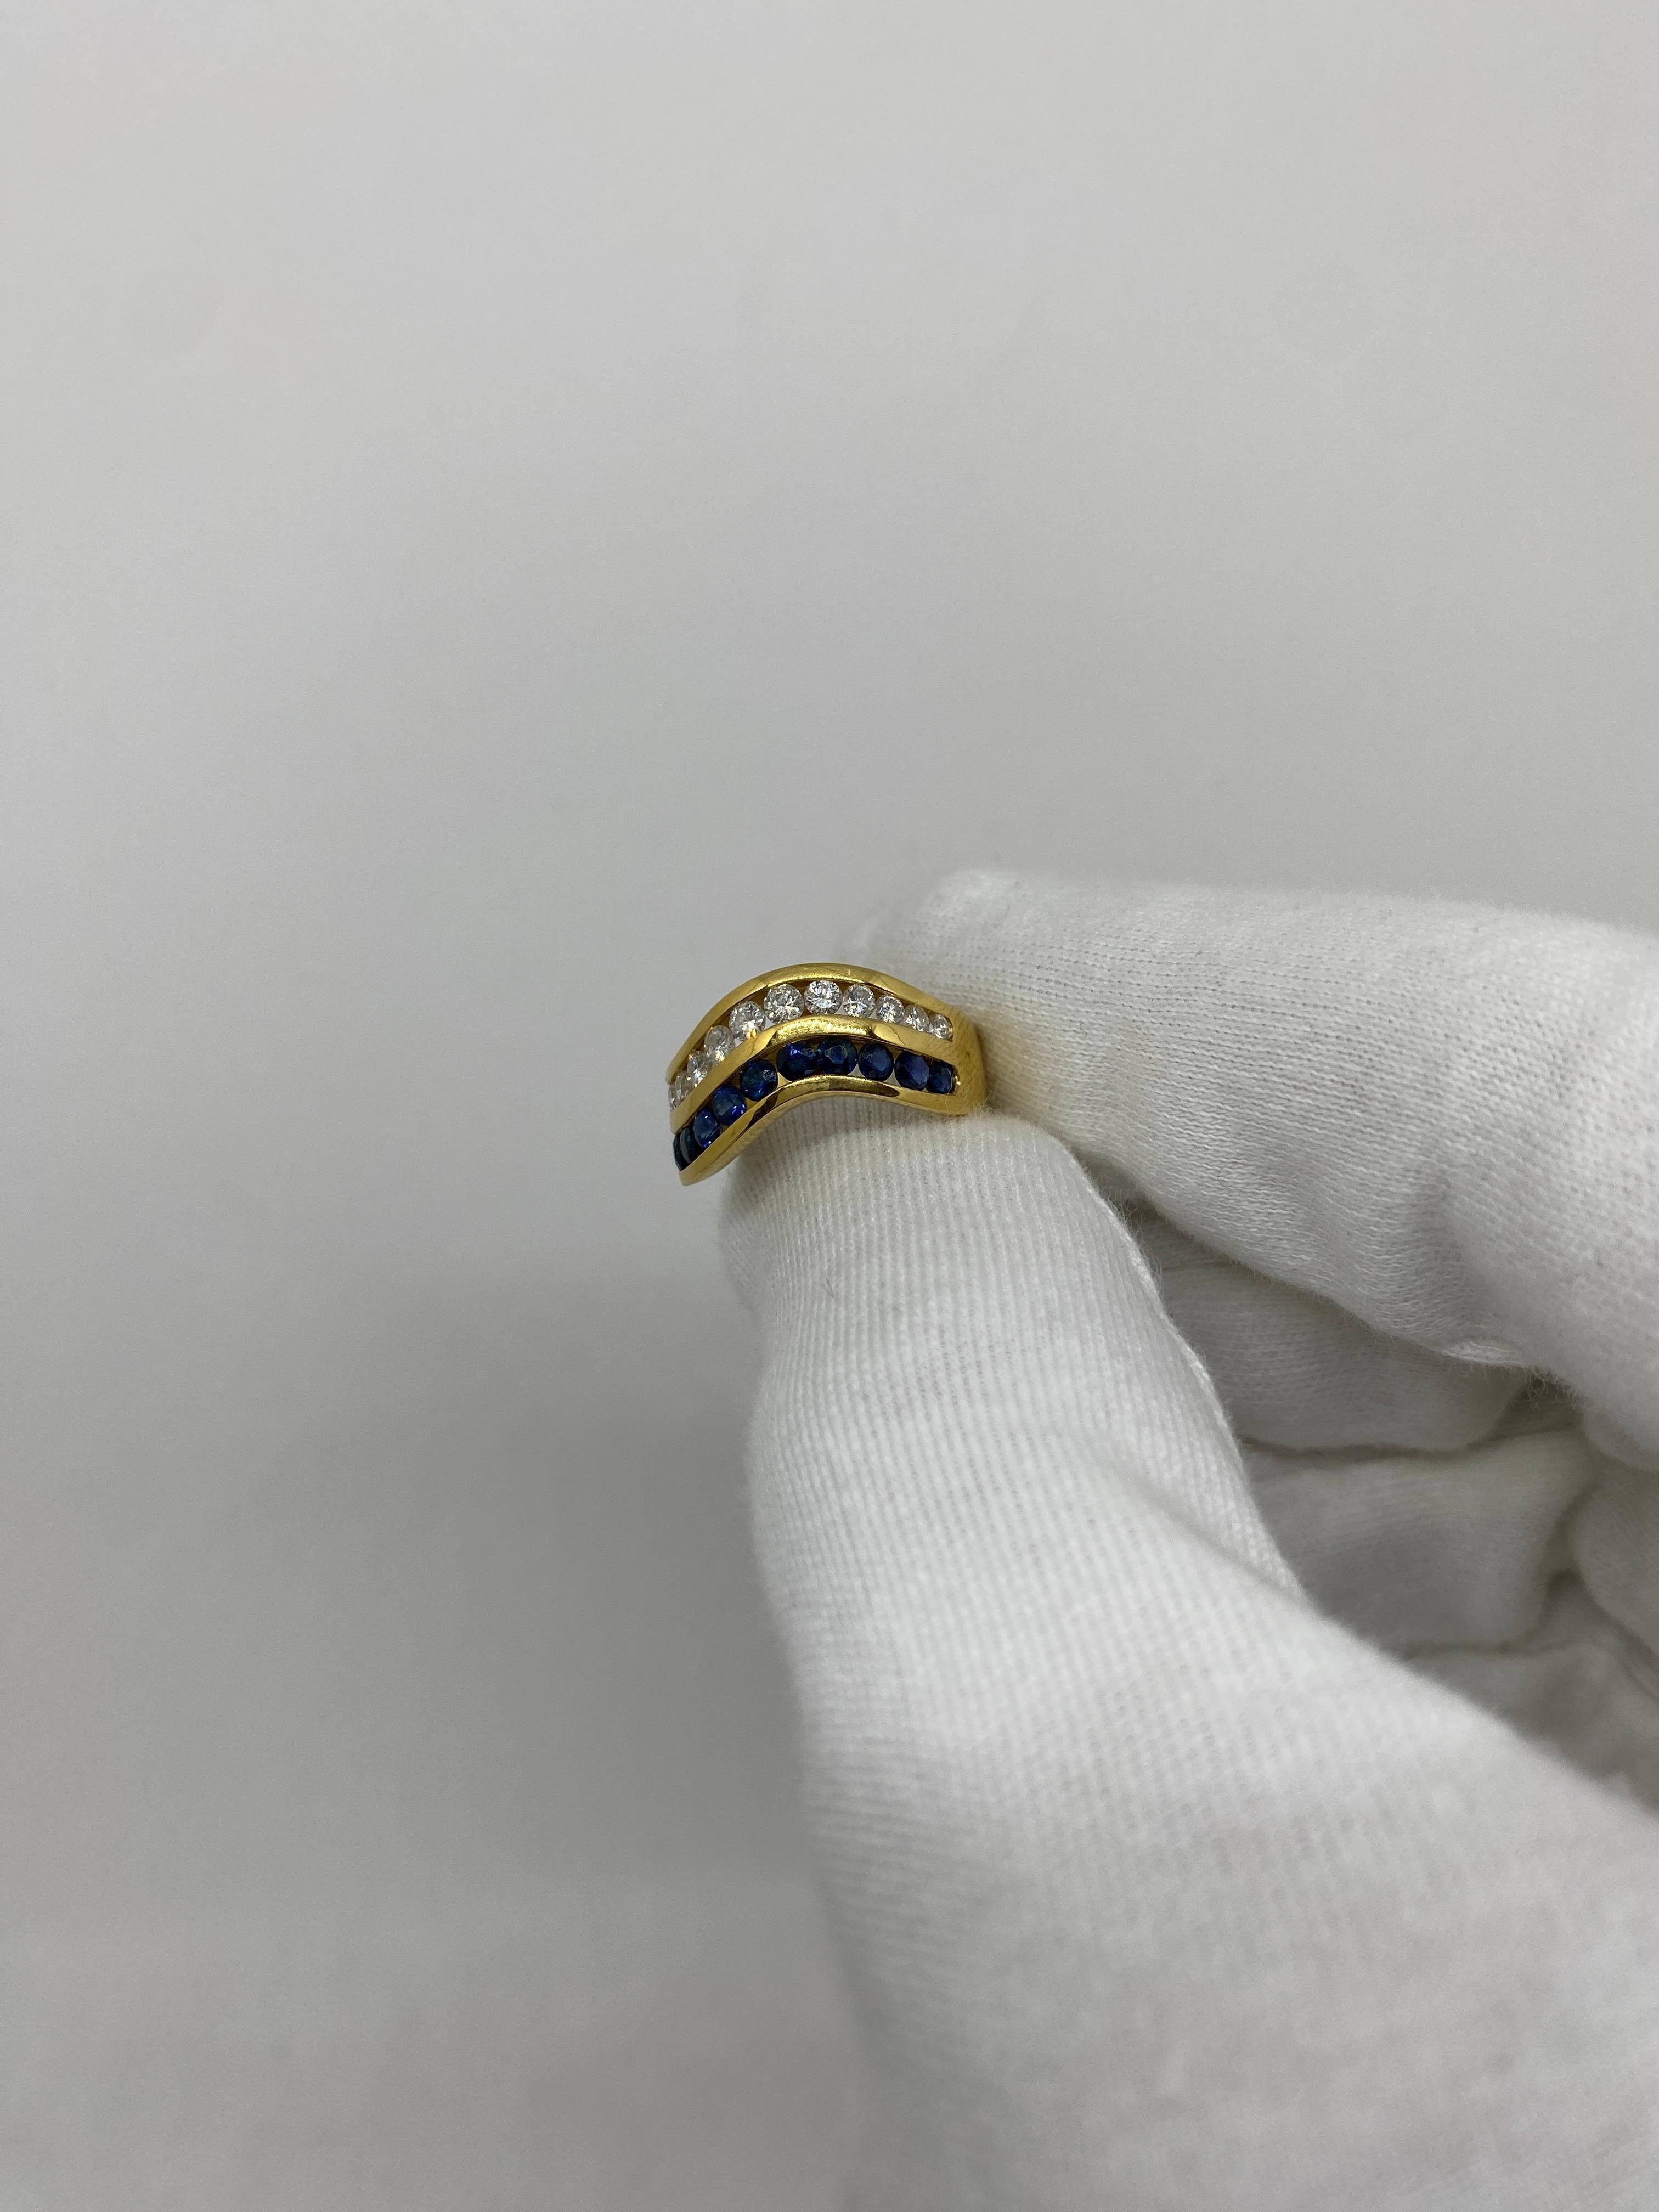 18-karat yellow gold band ring with brilliant-cut white natural diamonds for ct.0.92 and brilliant-cut blue sapphires for ct.1.33

Welcome to our jewelry collection, where every piece tells a story of timeless elegance and unparalleled